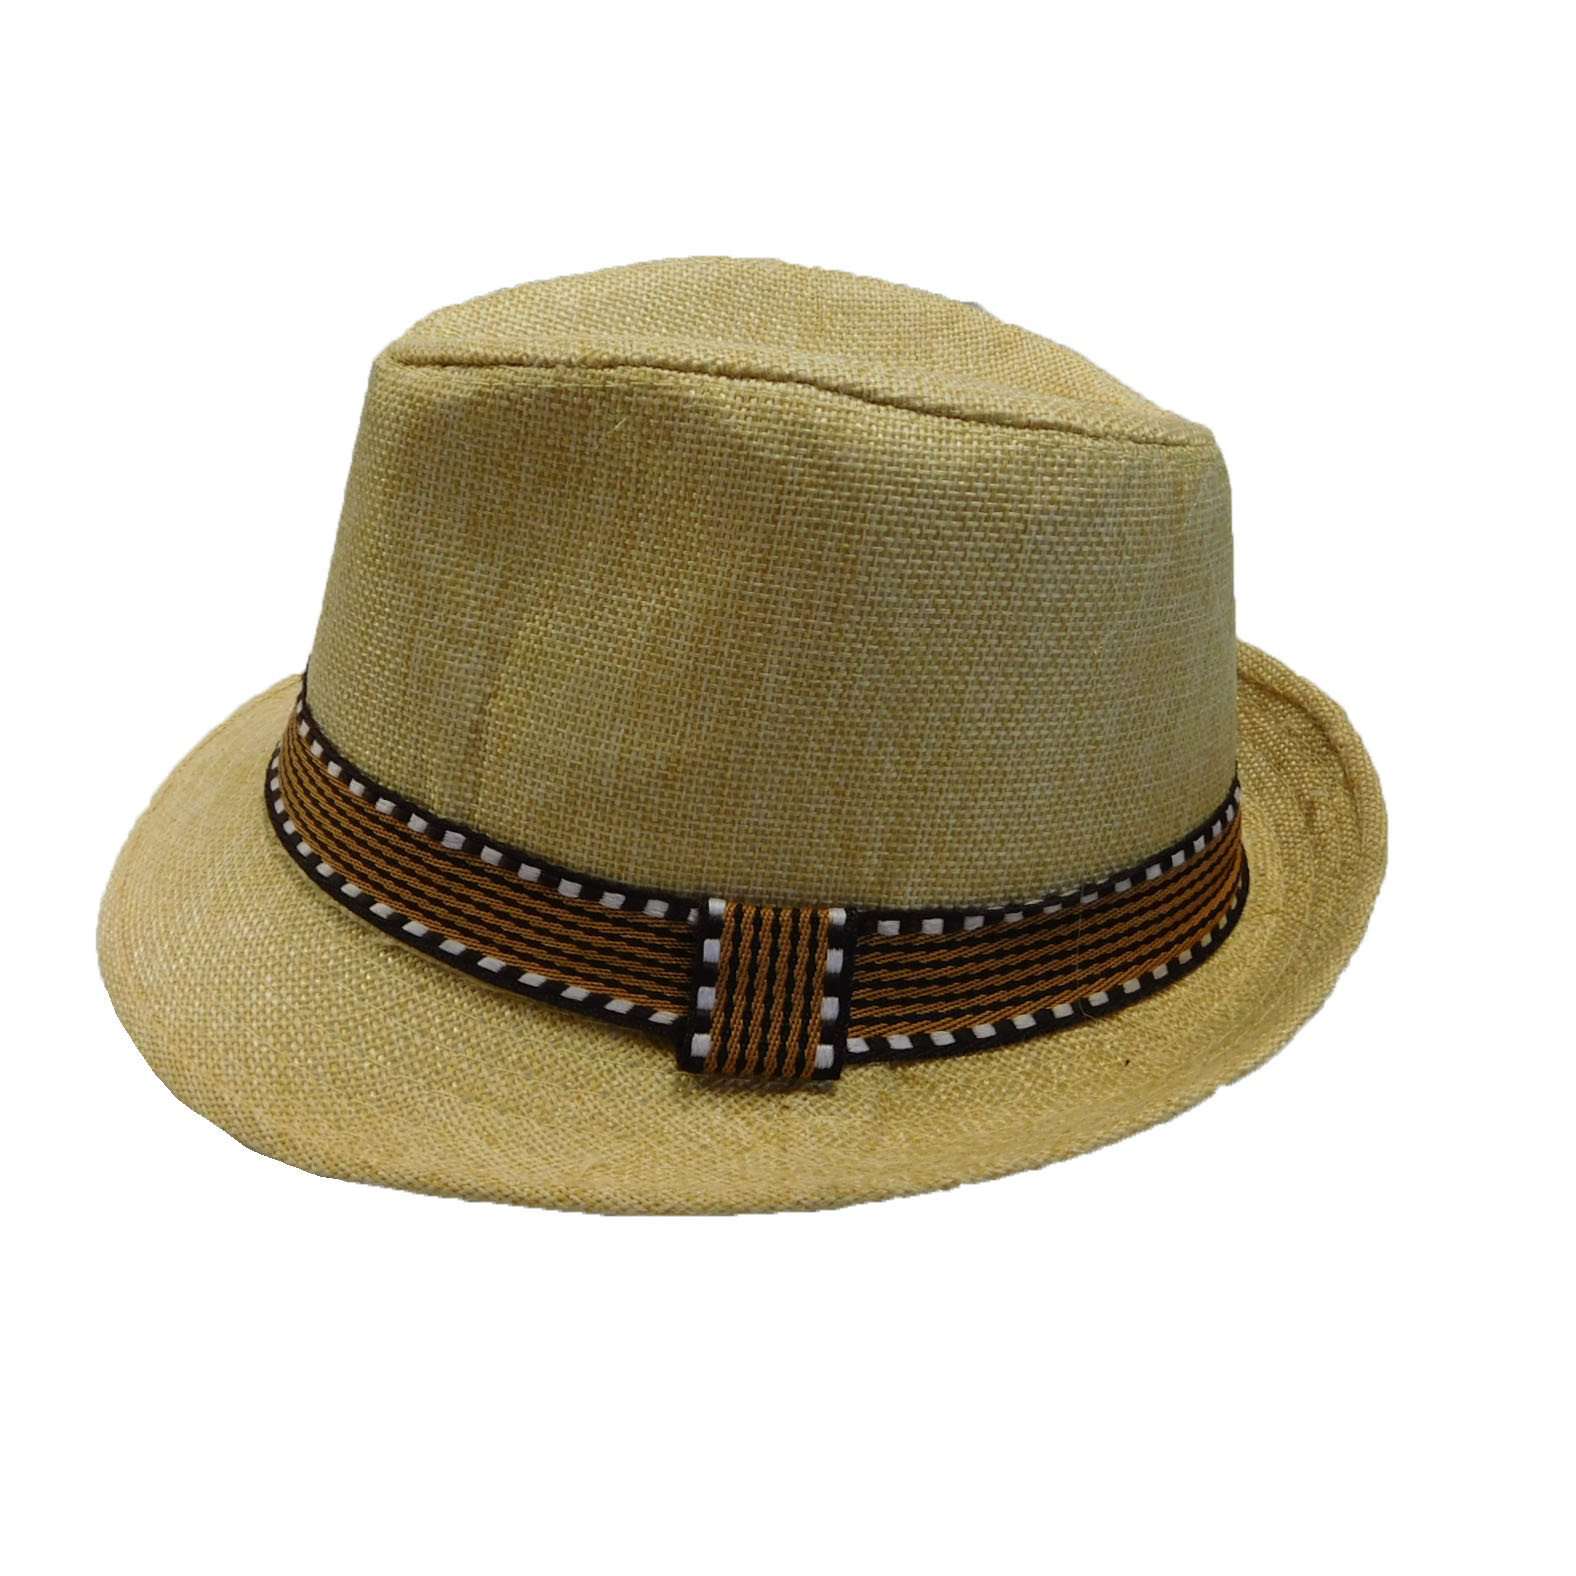 Kid's Fedora with Pattern Band - Natural Fedora Hat Boardwalk Style Hats    